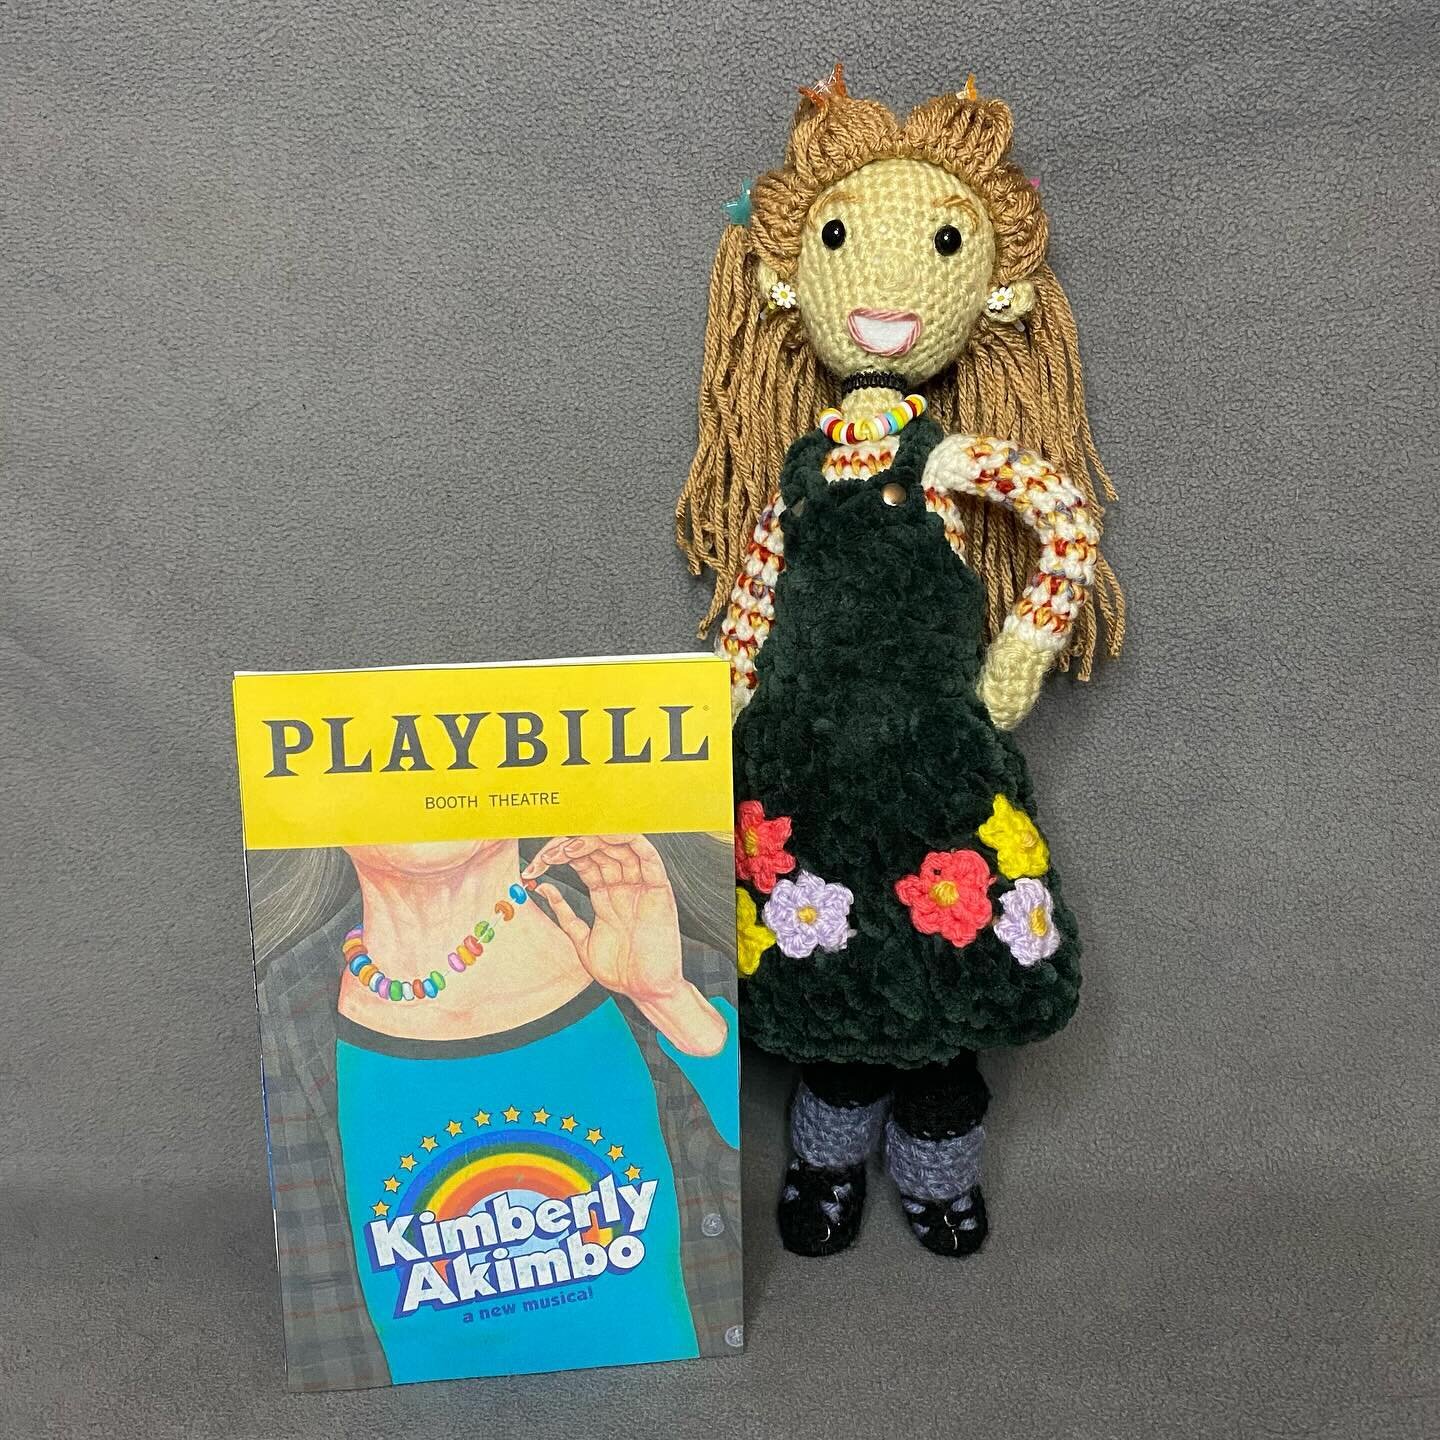 📚A few months ago I was asked by the incredible @zuly422 to create a Broadway Doll of @victoriajclark as Kimberly from the Tony Award Winning @akimbomusical complete with candy necklace. Check it out. 

🛍️ Custom orders are open so feel free to ema